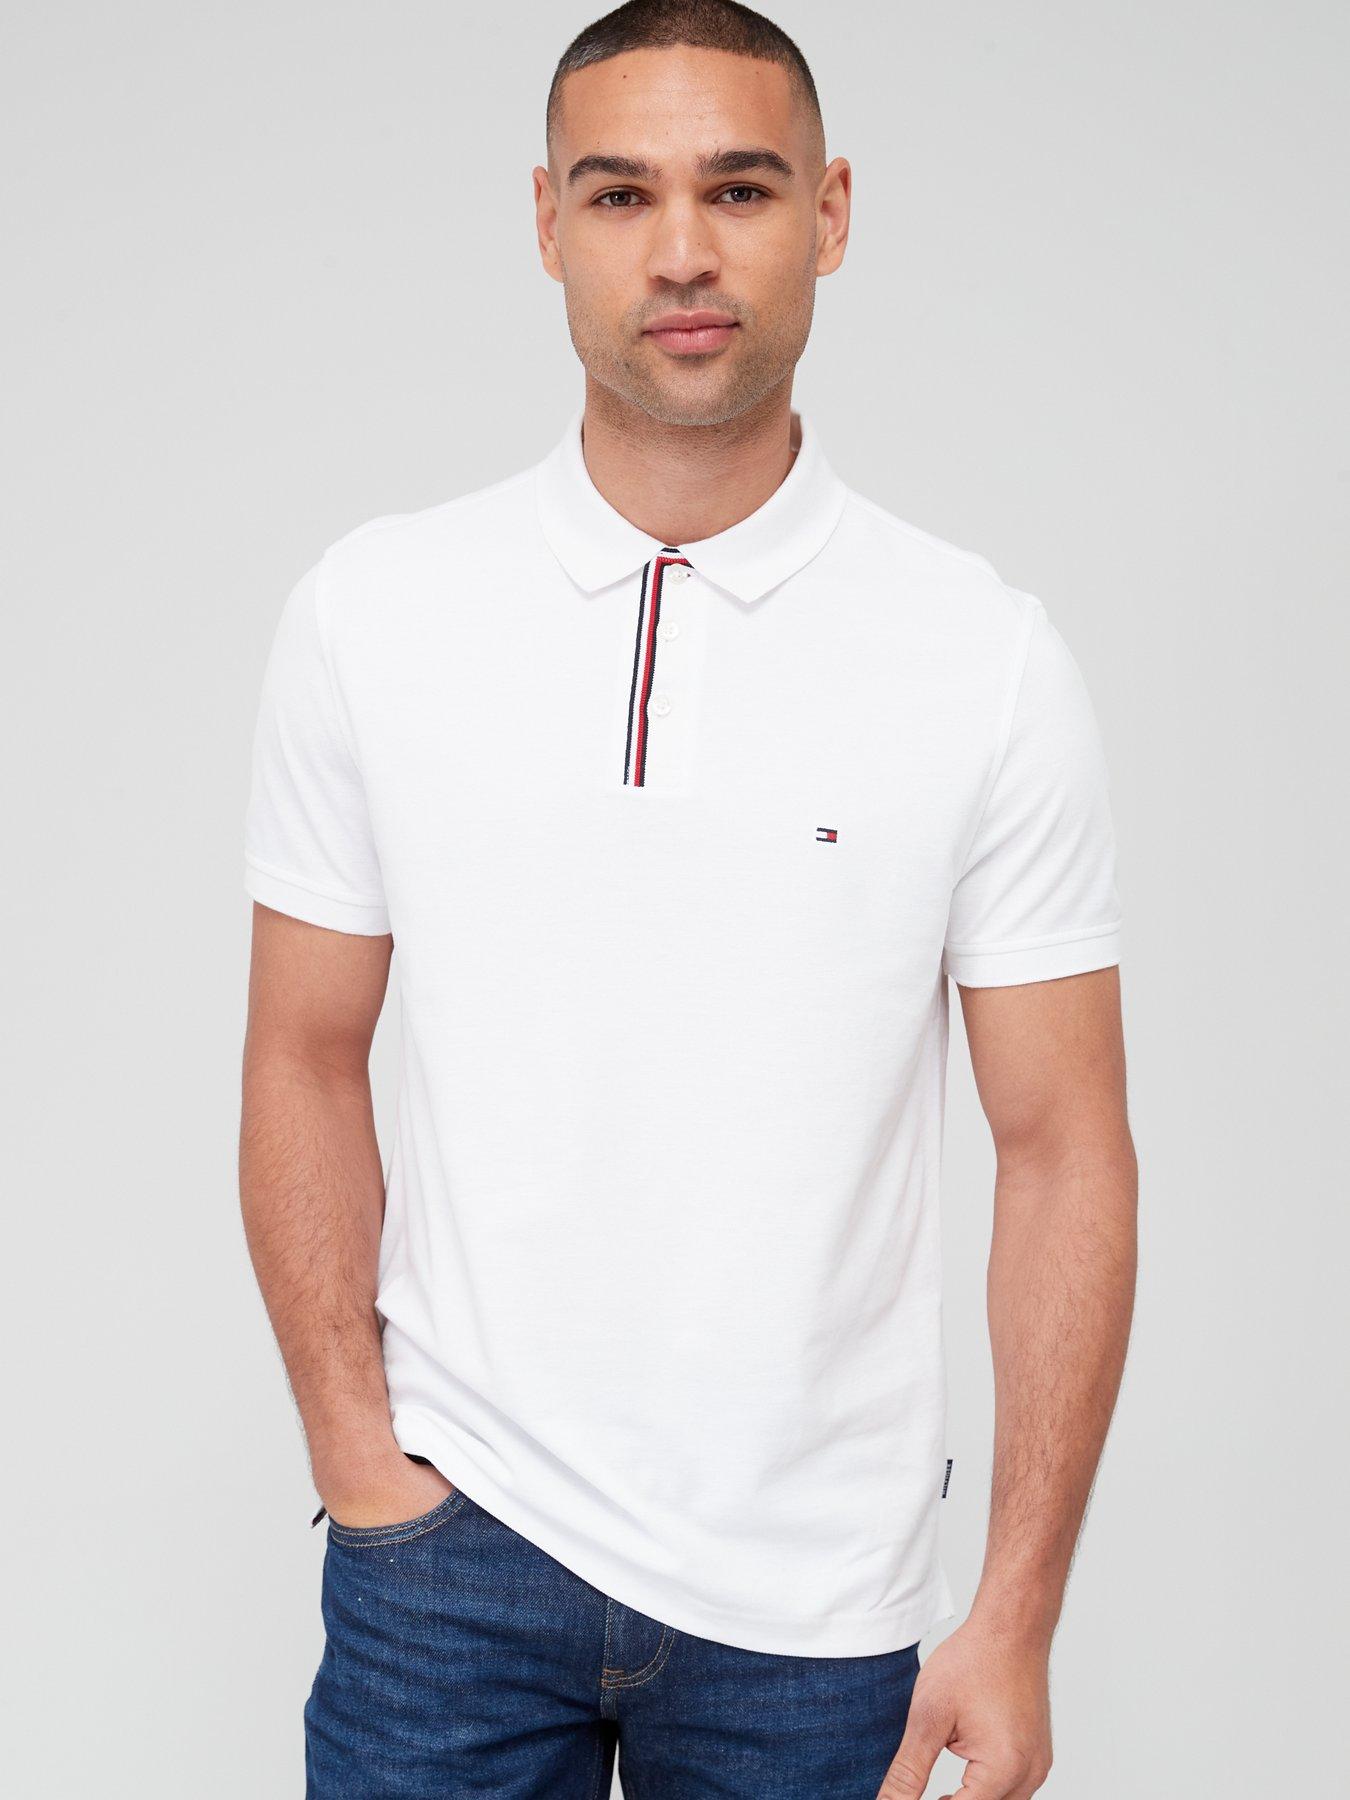 All Black Friday Deals | Tommy Sleeve Men Short Collection & | | hilfiger polos Main | T-shirts 